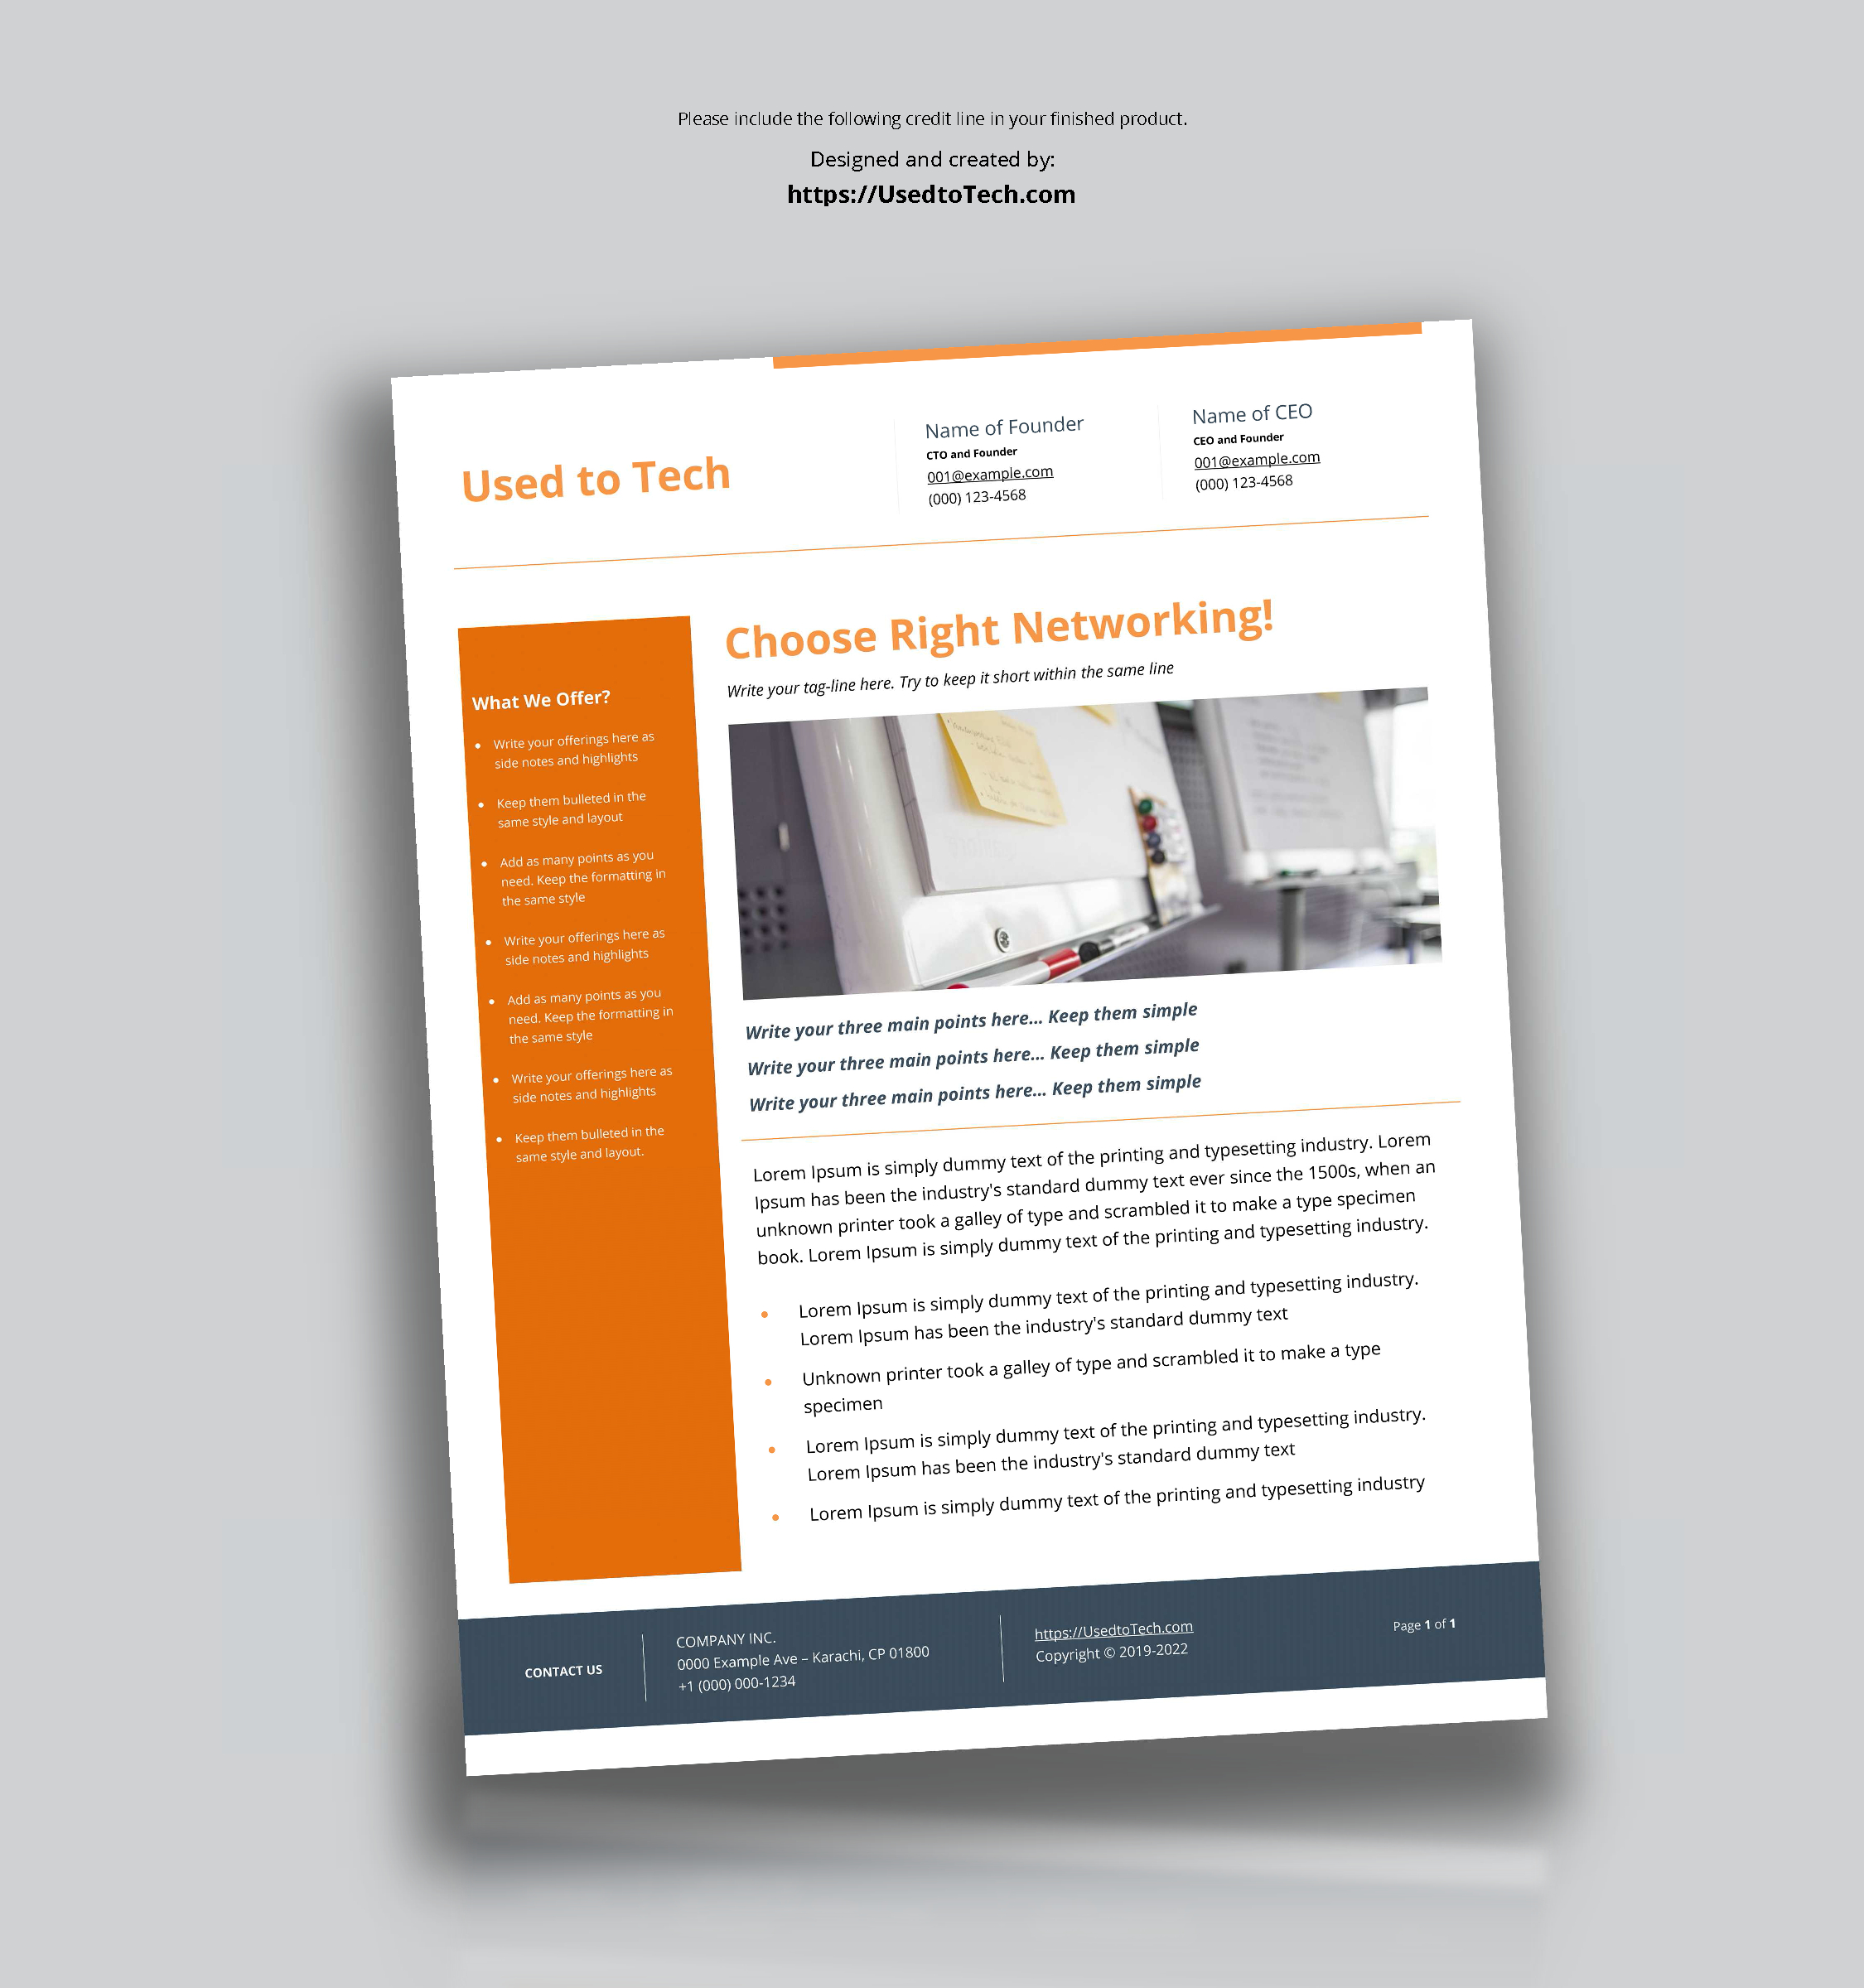 Modern Flyer Design In Microsoft Word Free – Used To Tech Throughout Templates For Flyers In Word